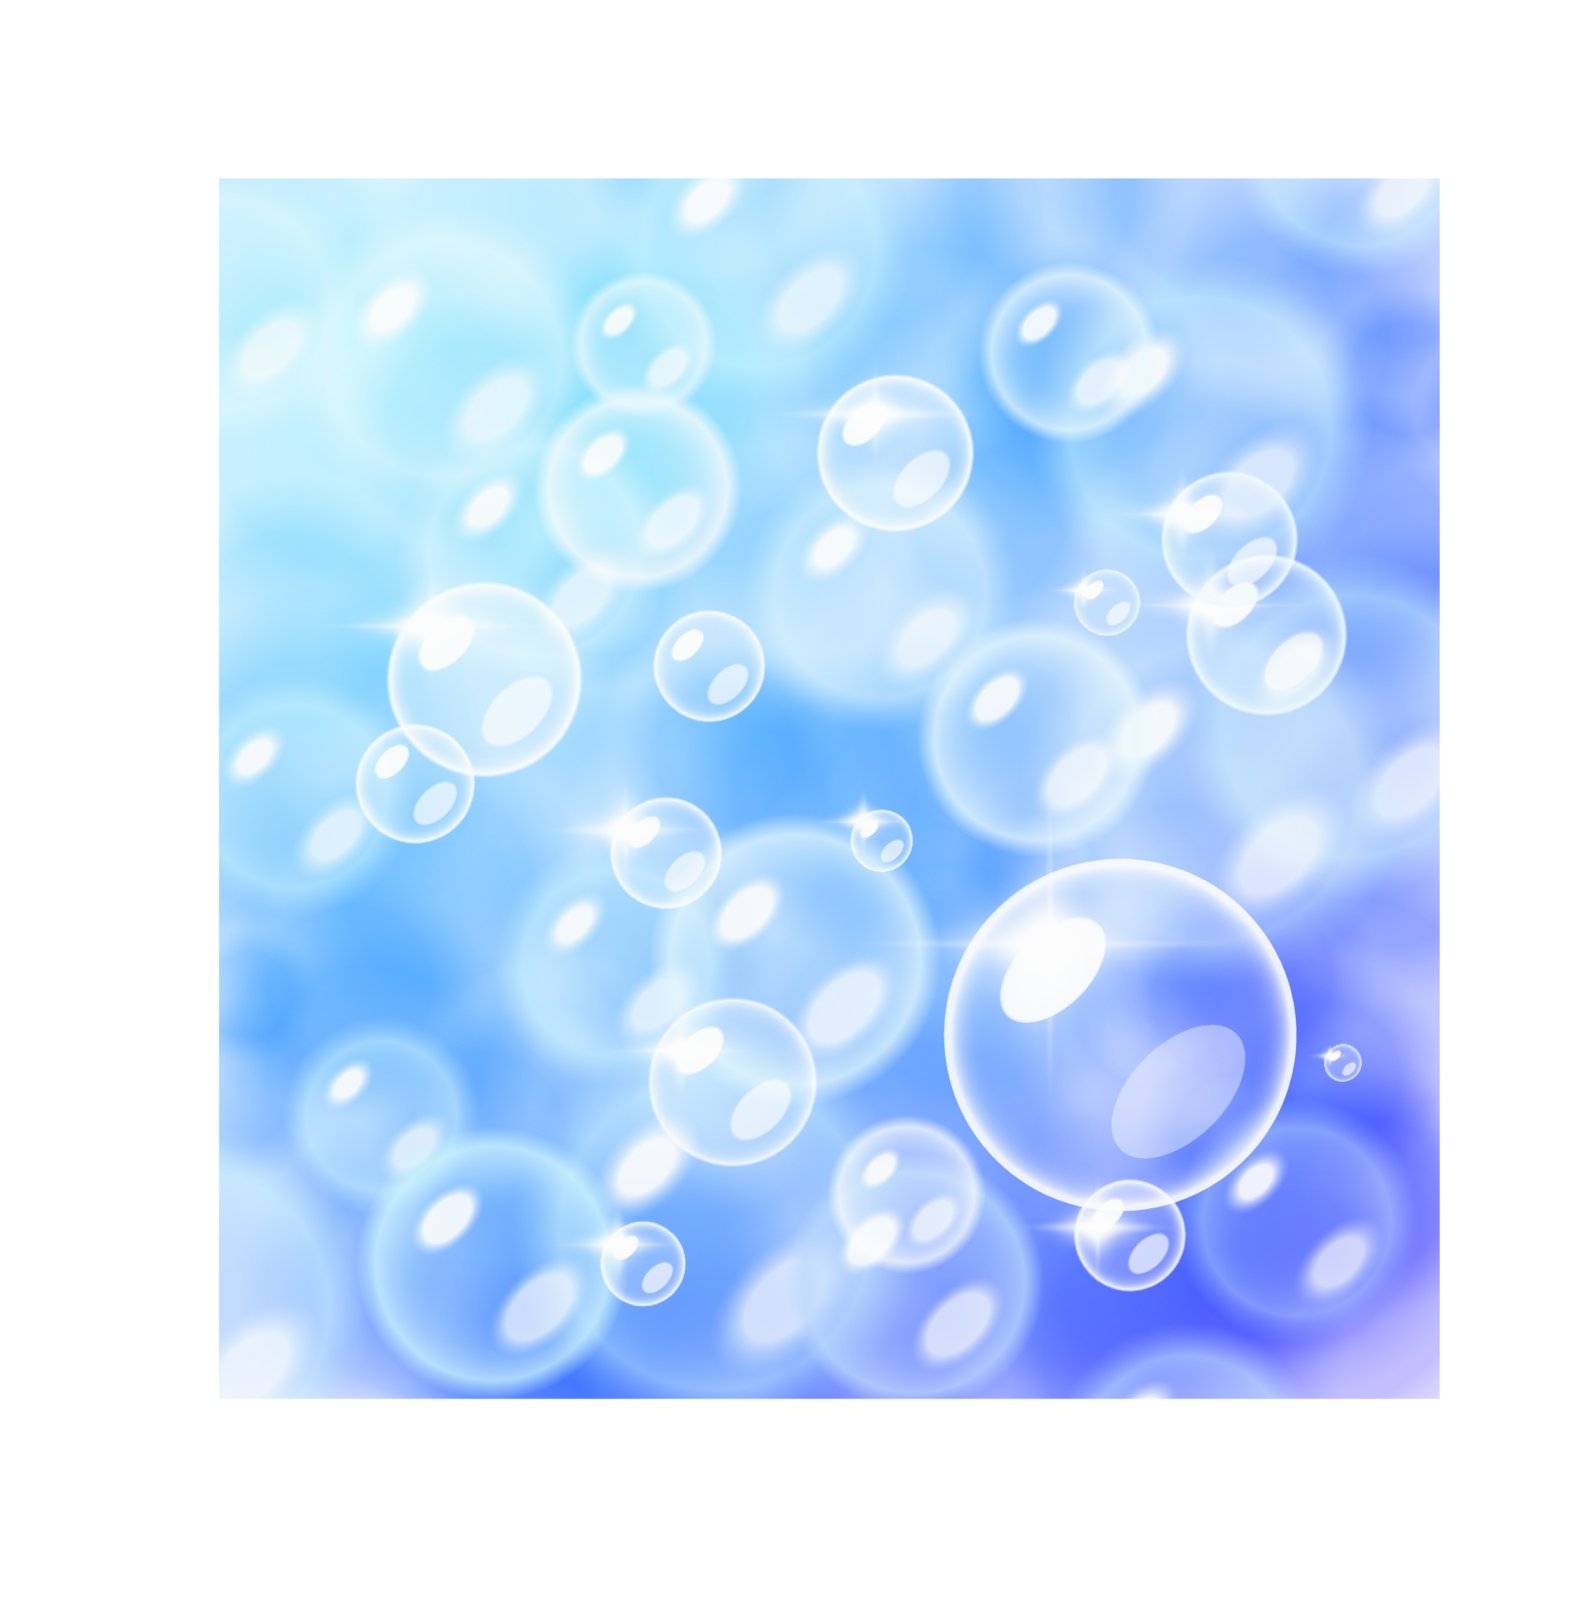 Blurred bubbles over blue by Tilo